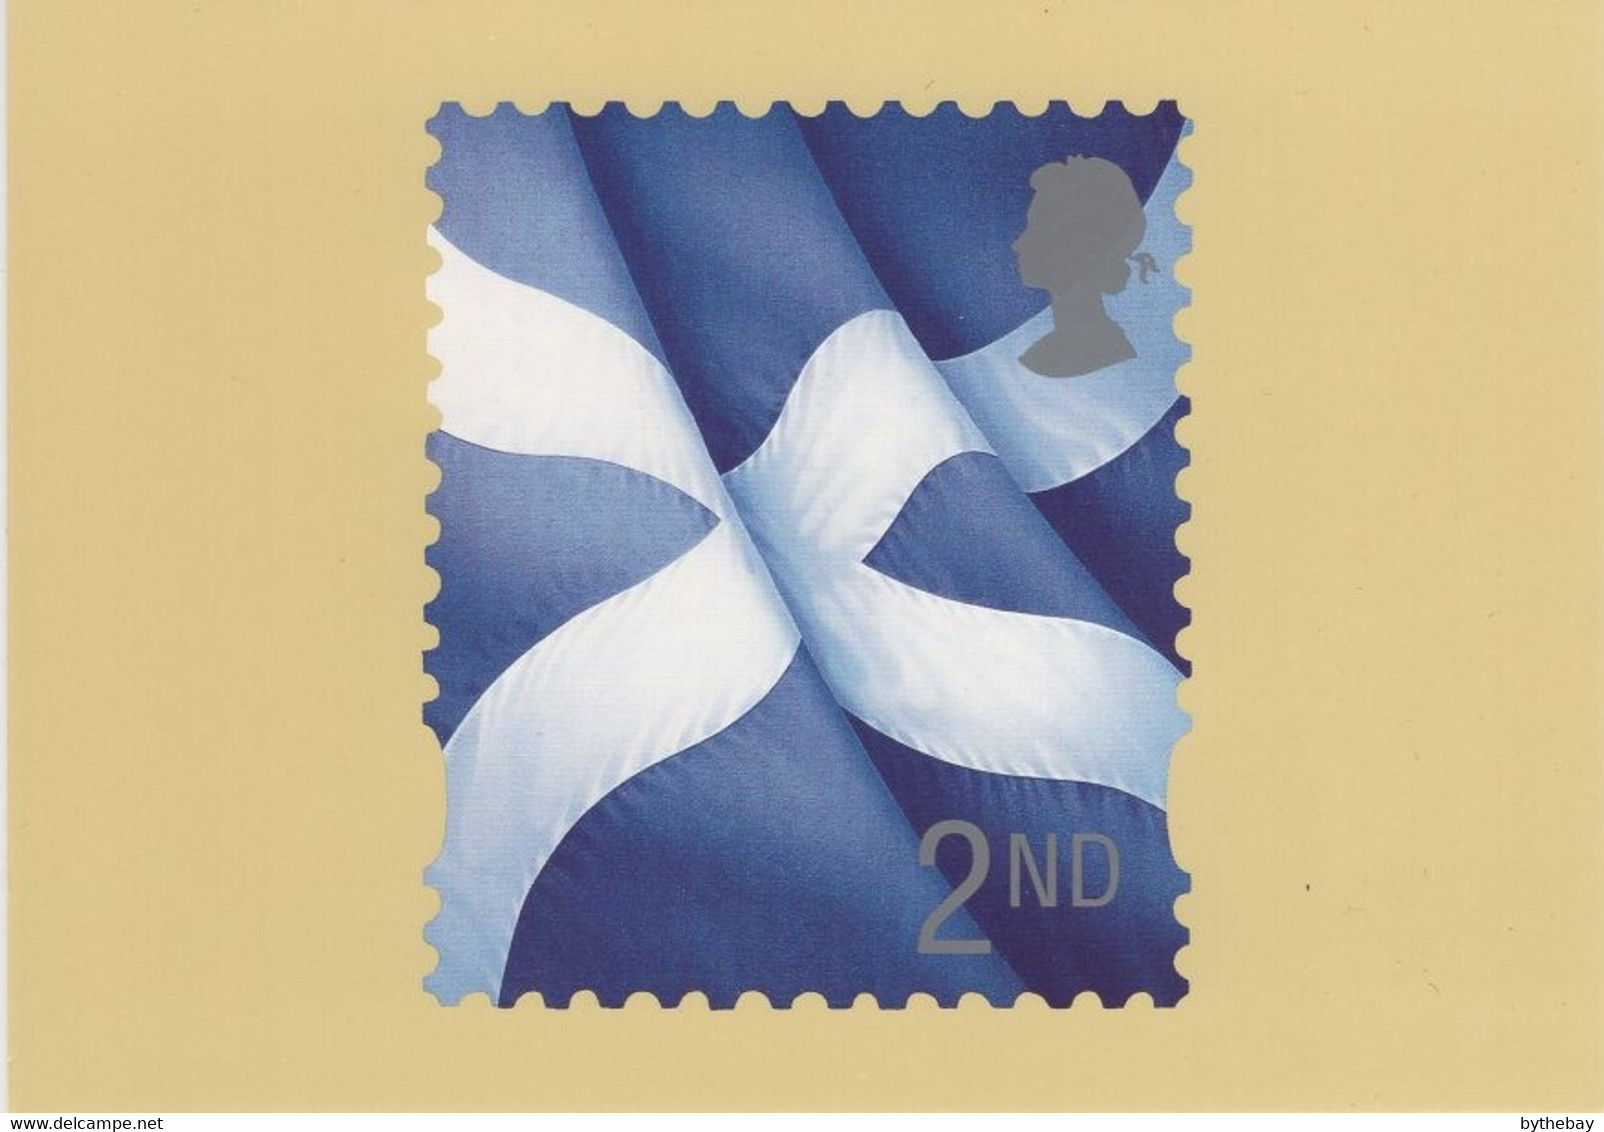 Great Britain Scotland 1999 PHQ Card Sc 14 2nd St. Andrew's Cross Flag - PHQ Cards